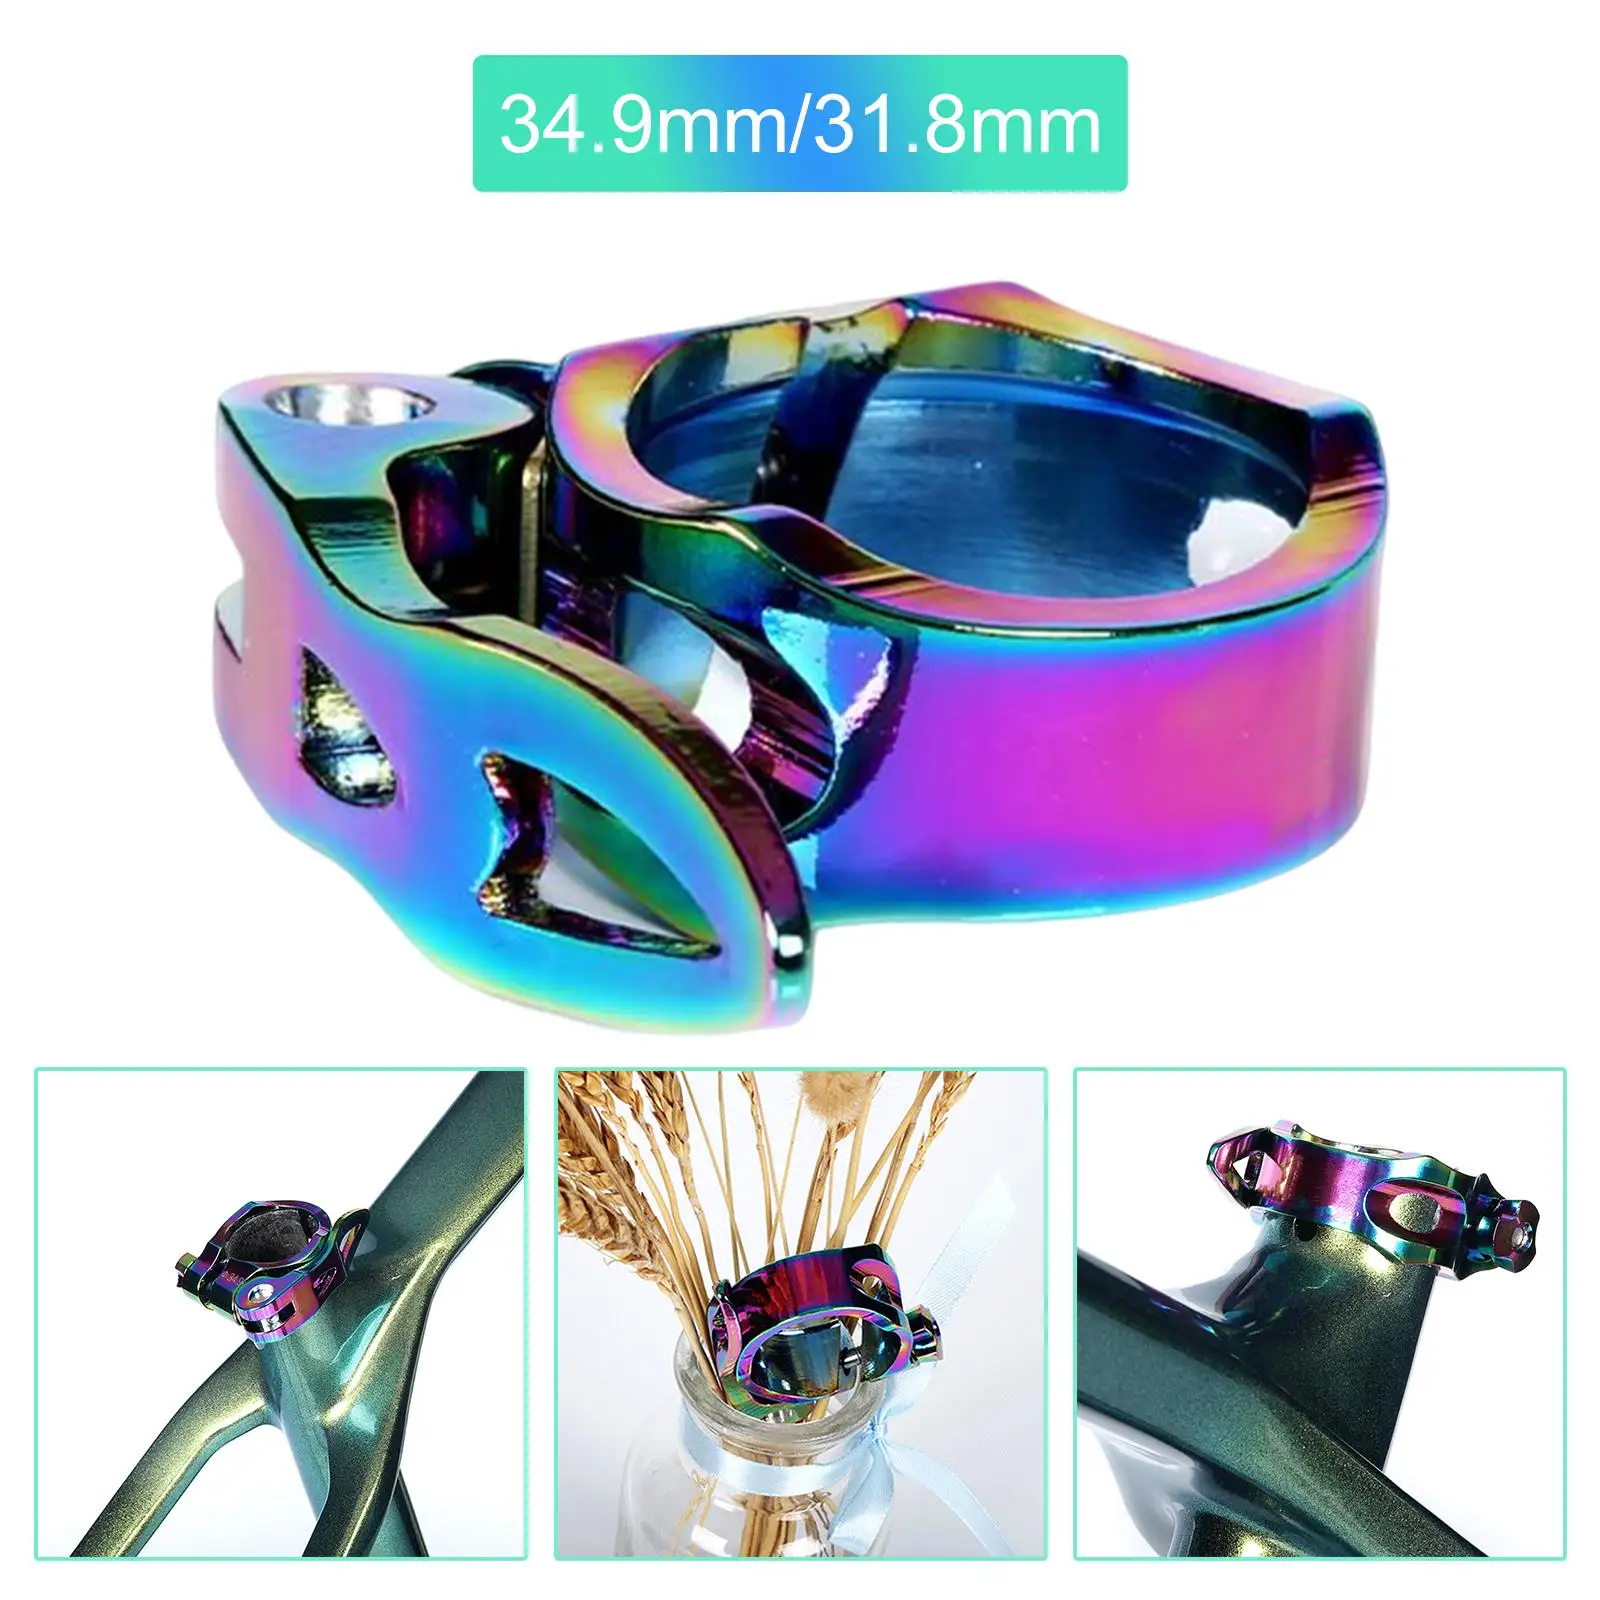 Colorful Bike Seatpost Clamp 31.8mm or 34.9mm Equipment Tube Accessory Clip Gear for Cycling BMX Folding Bike MTB